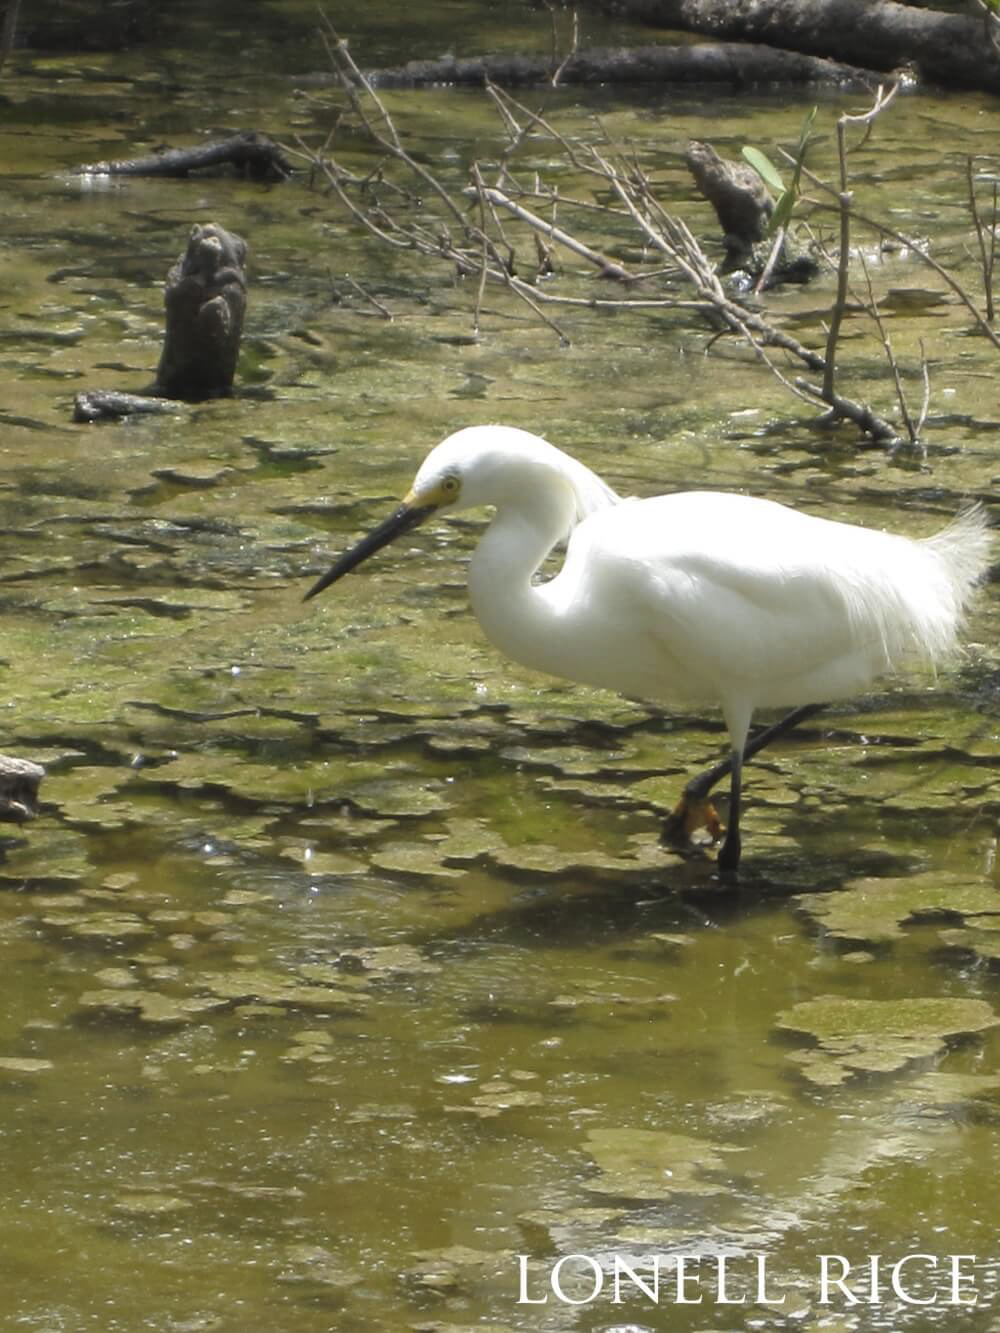 Snowy egret slowly wading through swampy waters.